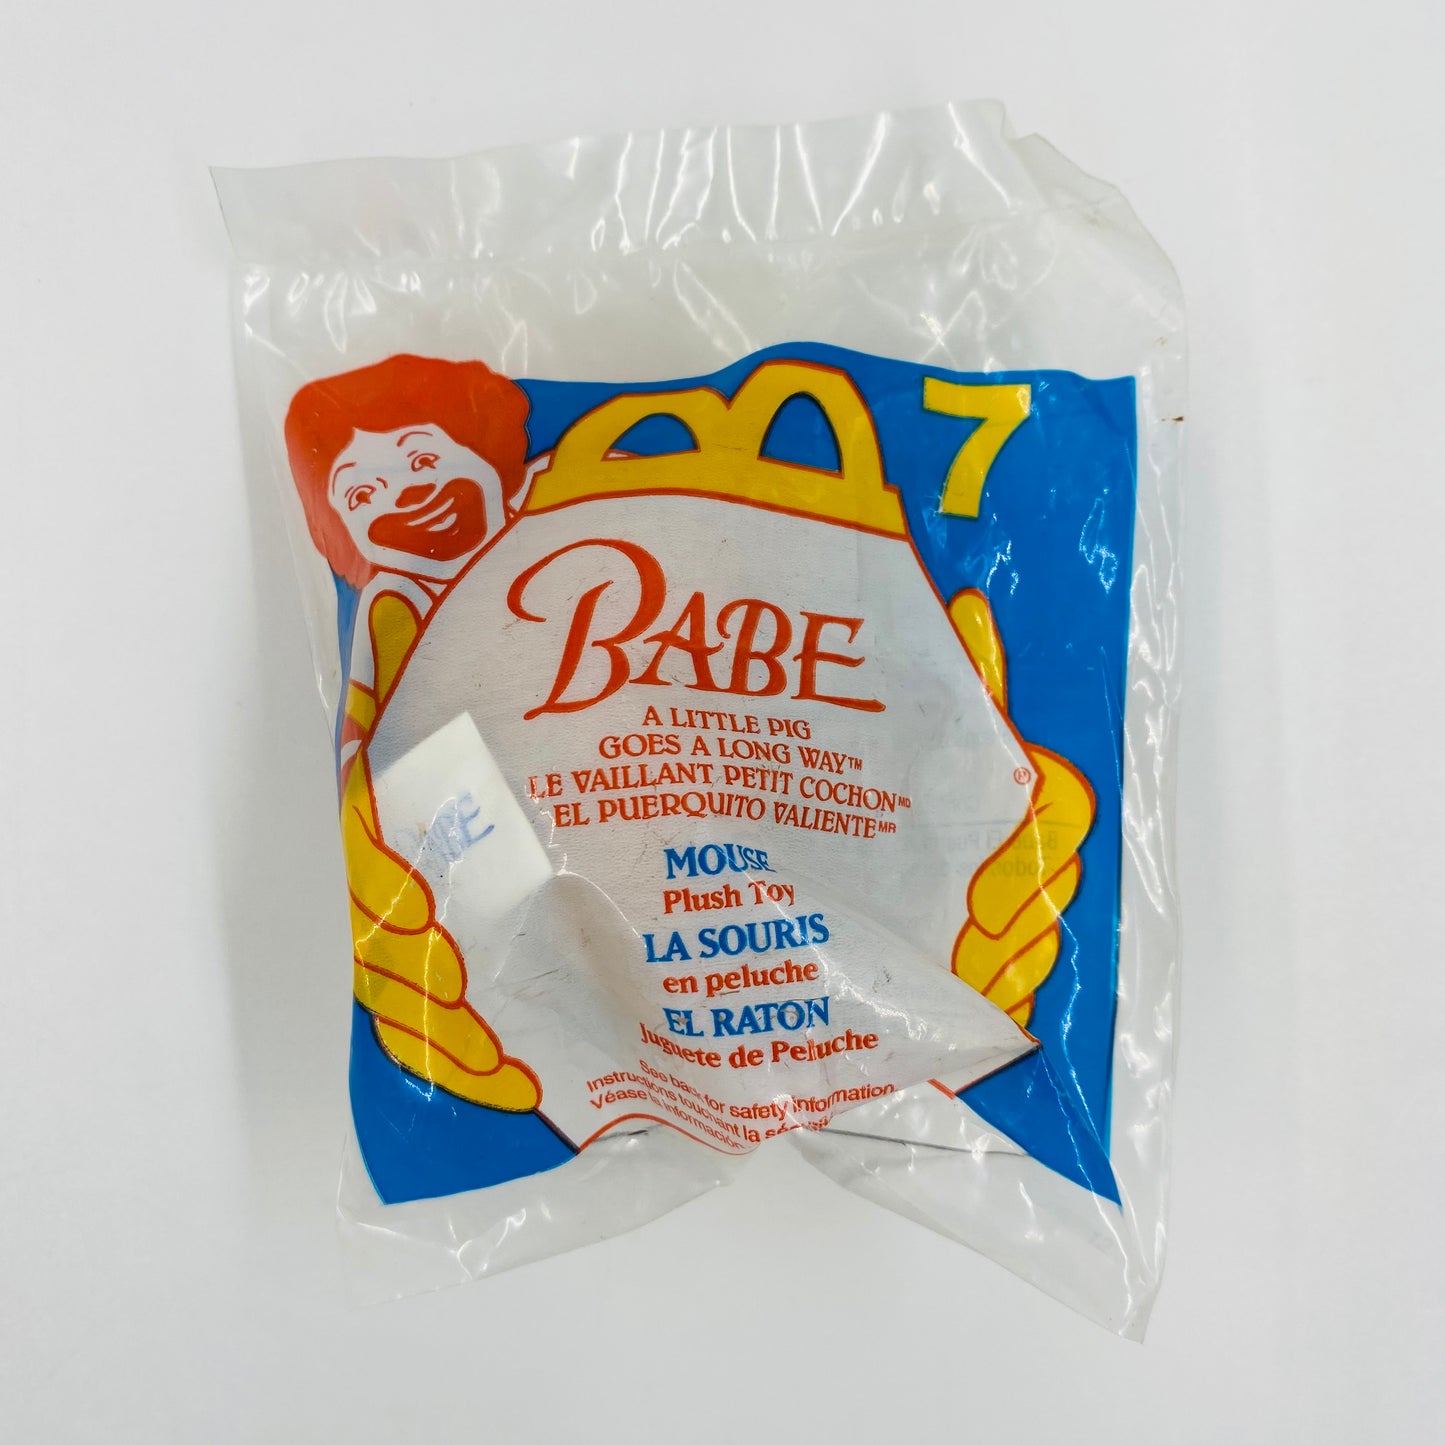 Babe A Little Pig Goes A Long Way Mouse McDonald's Happy Meal plush toy (1996) bagged